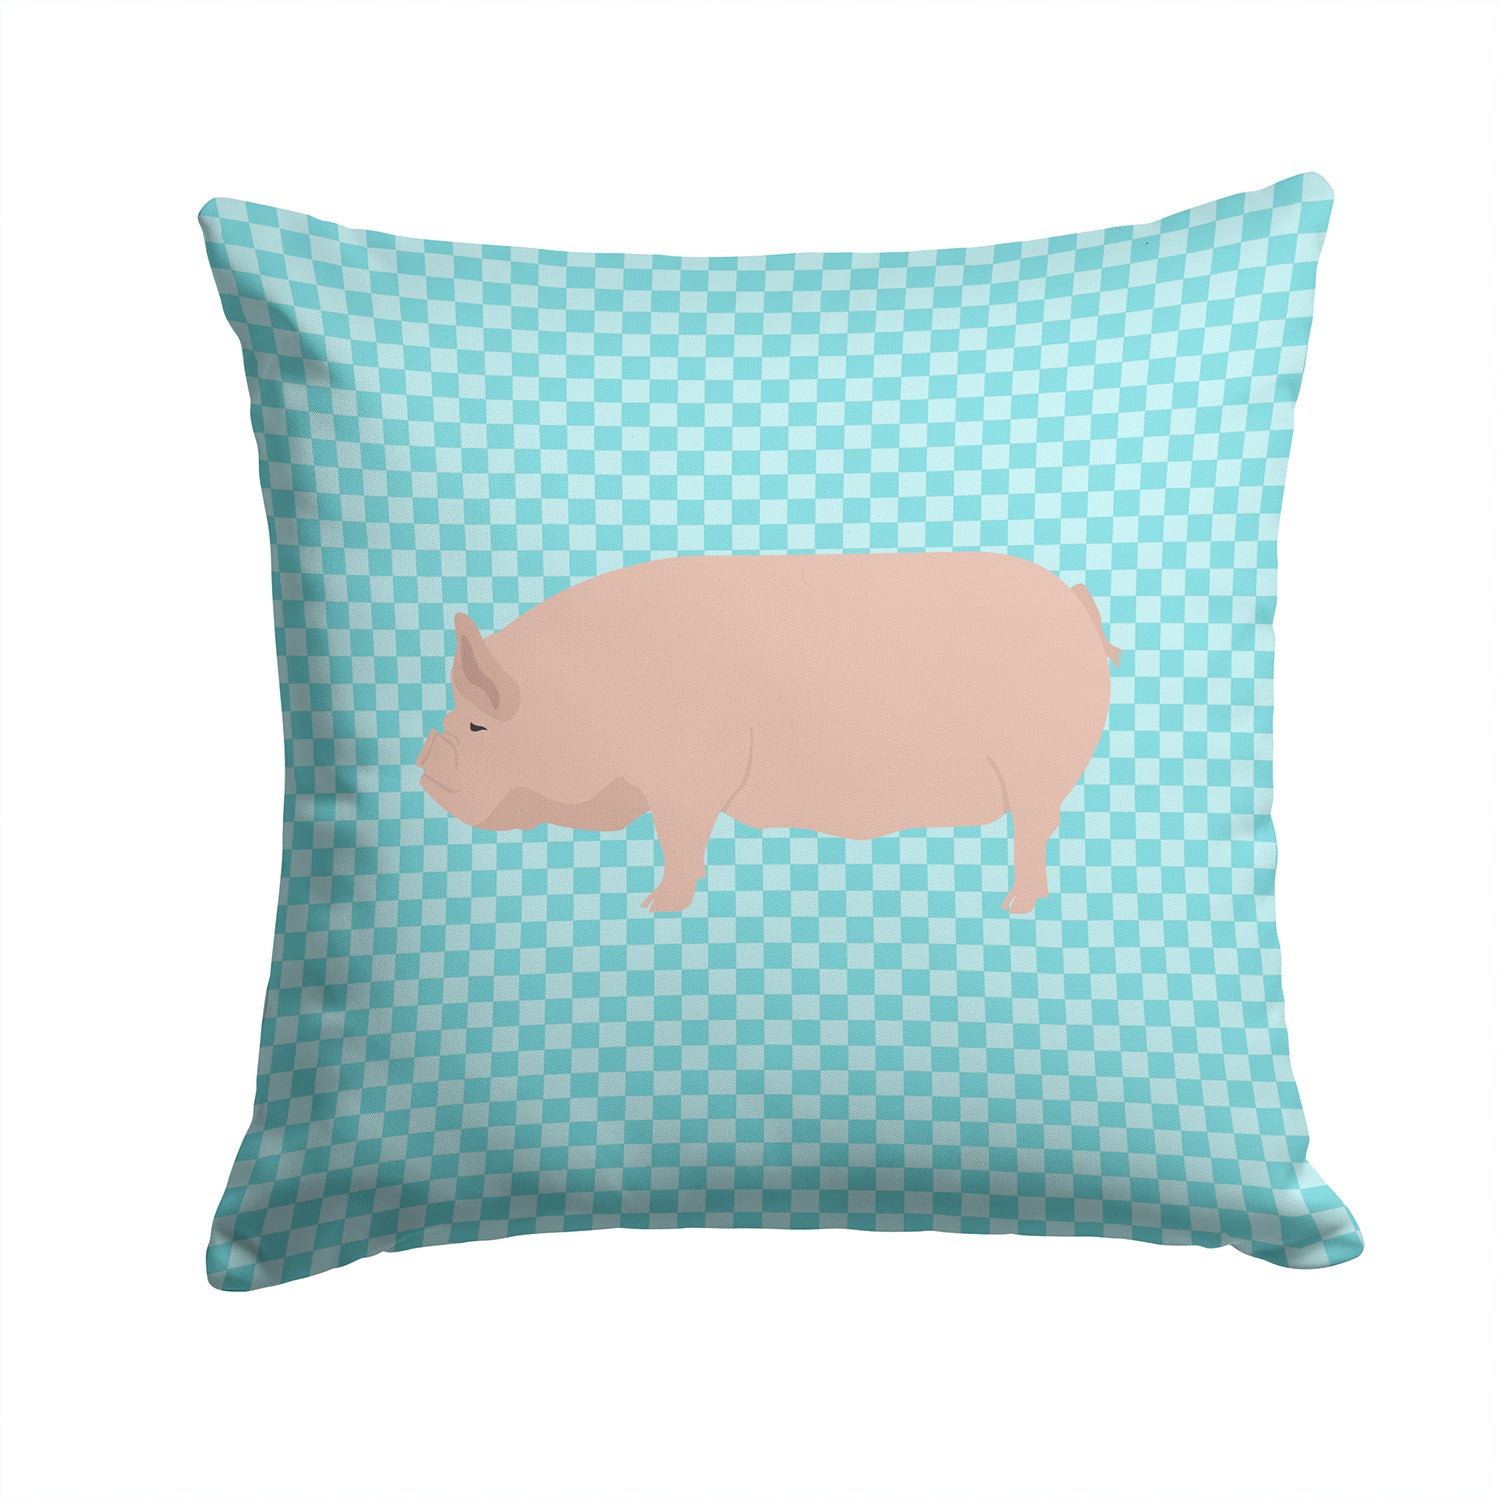 Welsh Pig Blue Check Fabric Decorative Pillow BB8111PW1414 - the-store.com